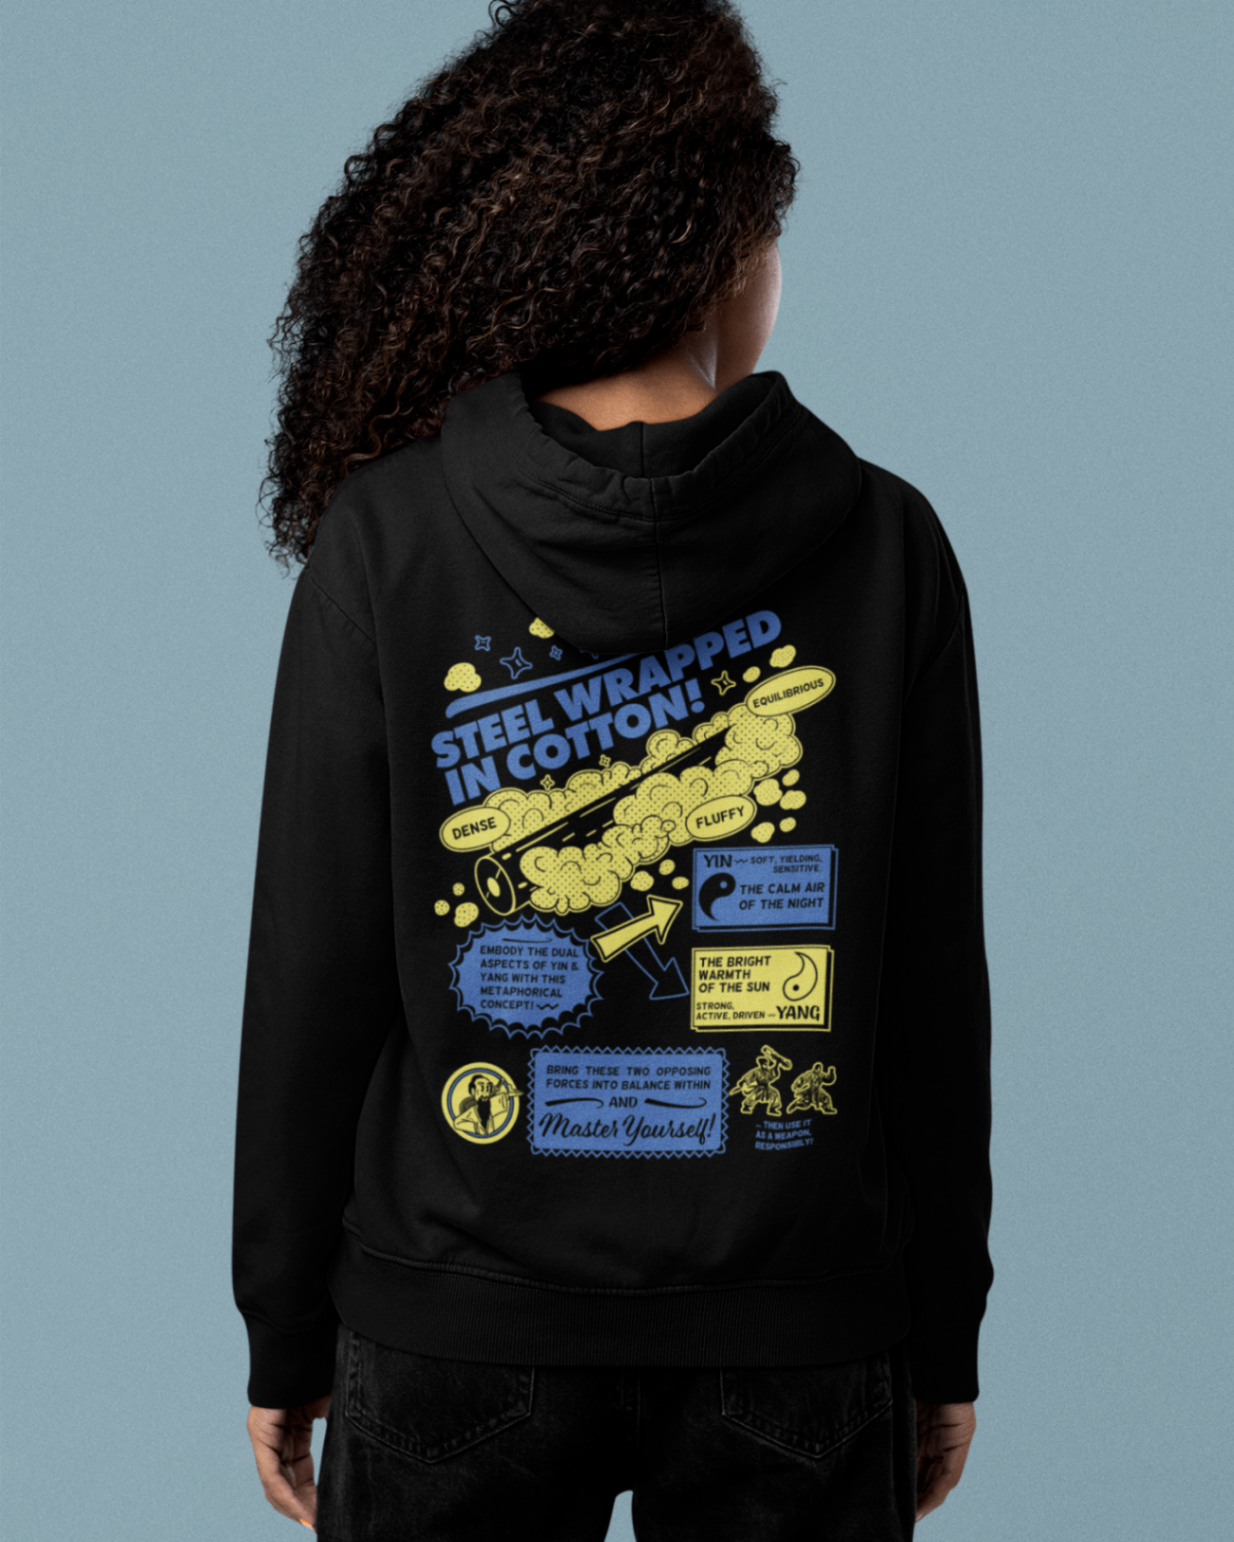 back view of a female model wearing a black zip up hoodie with steel wrapped in cotton design in yellow and navy text 